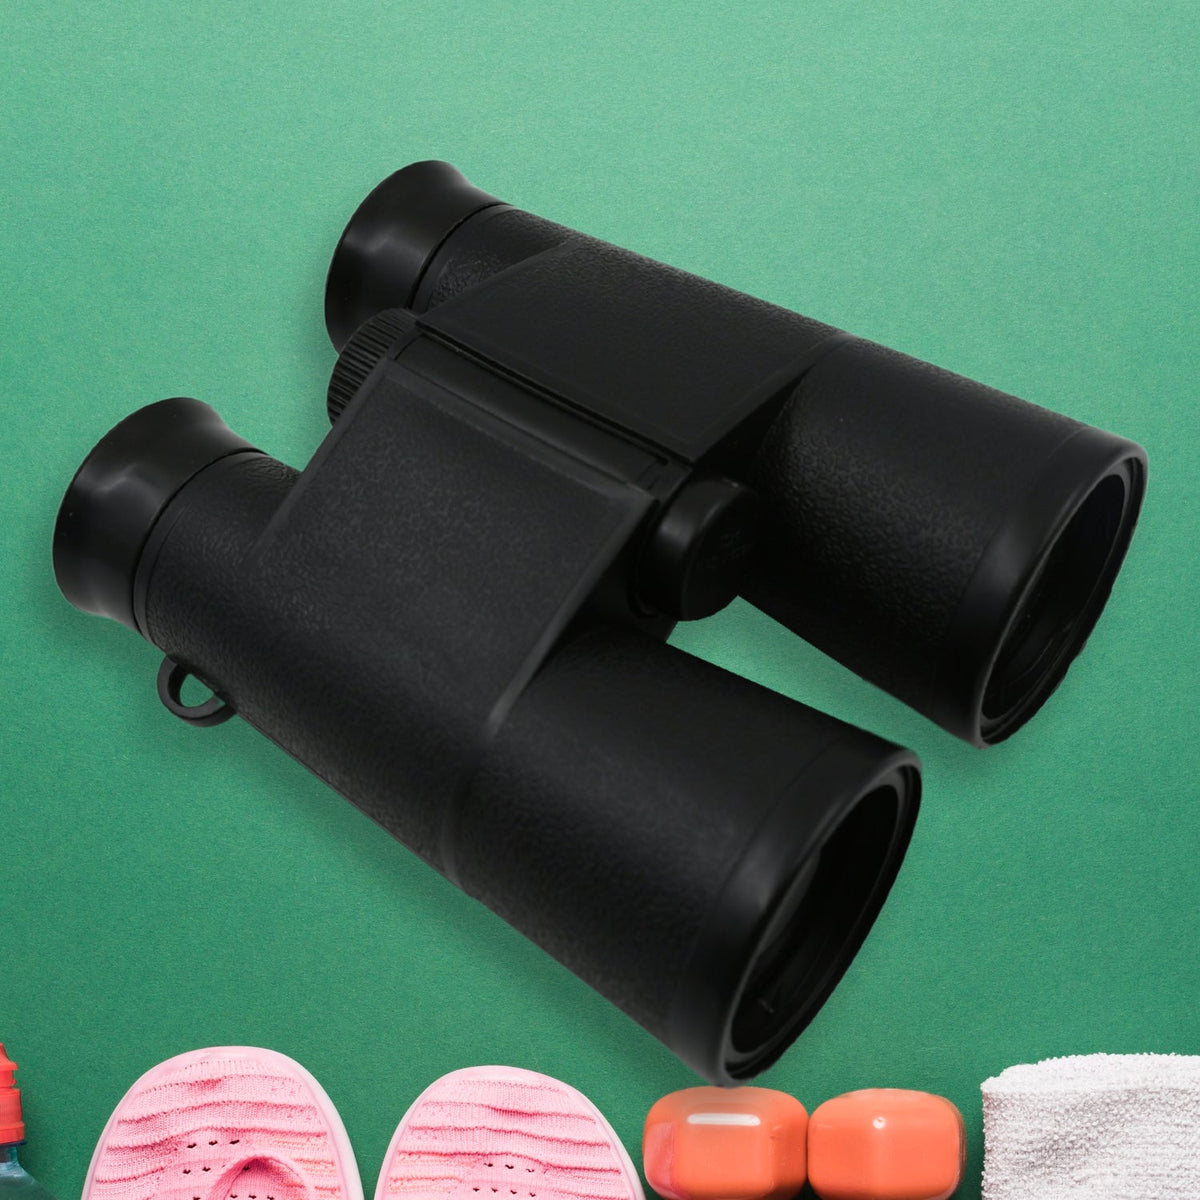 17569 Learning Toy Binoculars / Telescopic for Kids Educational Birthday Return Gifts for Boys and Girls in Bulk Hunting Bird Watching Camping Outdoor, Binoculars for Hunting Trips (6x35 MM / 1 Pc)